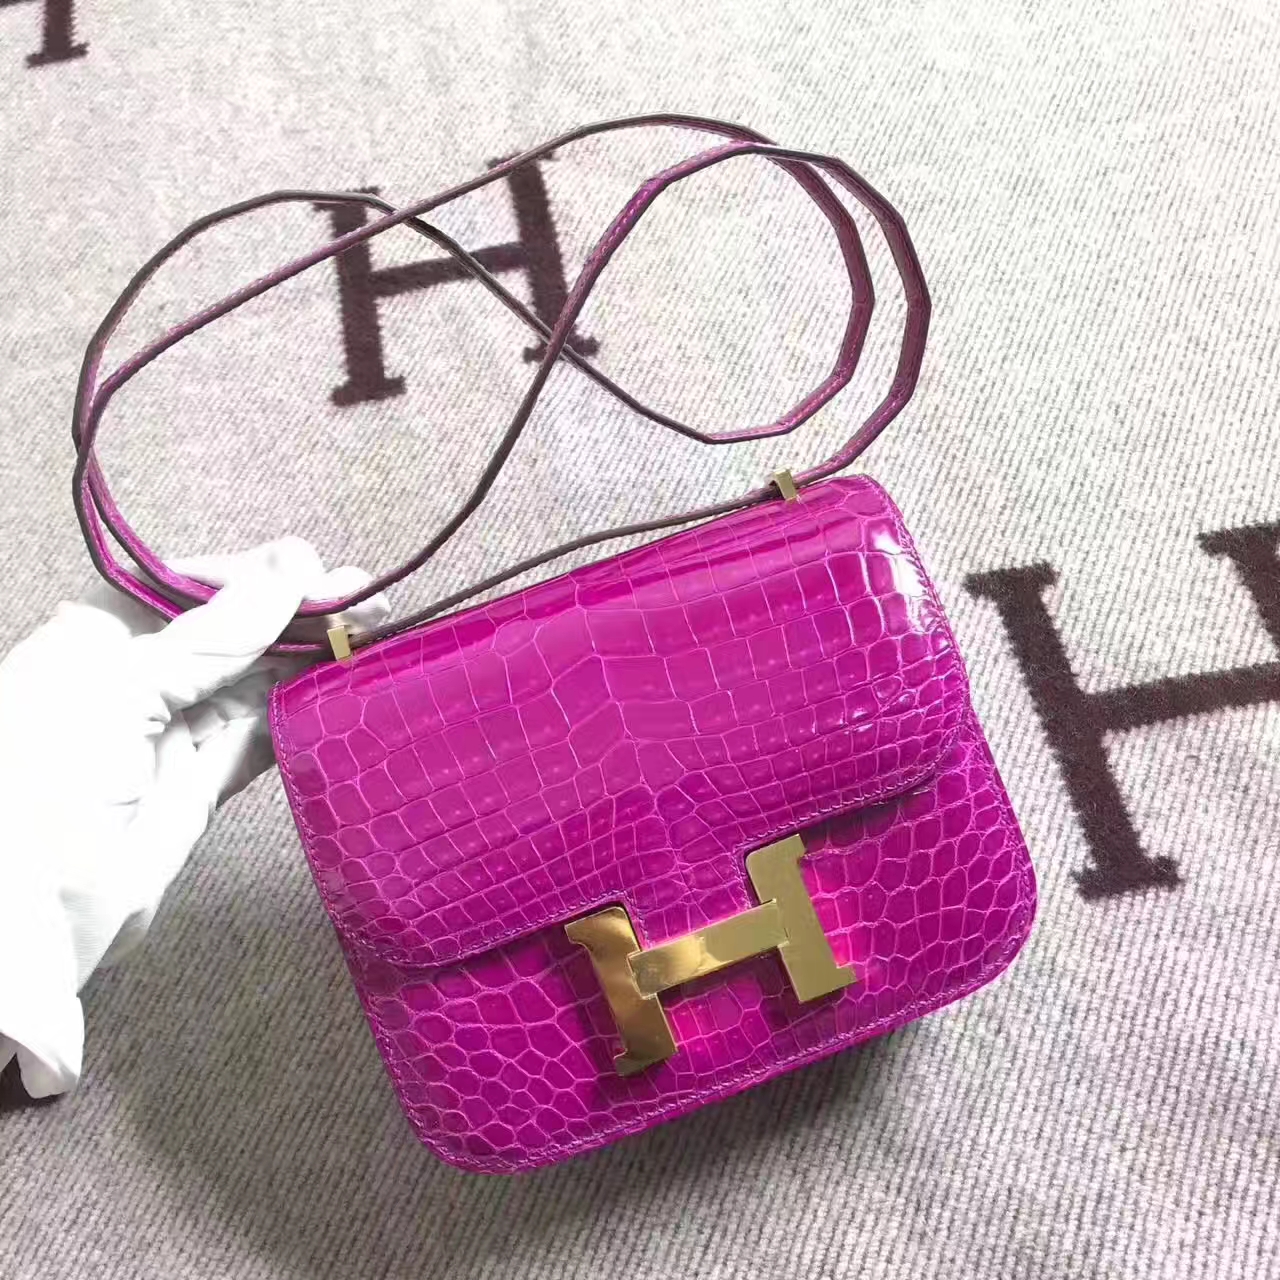 Hand Stitching Hermes Crocodile Shiny Leather Constance19cm in J5 Rose Scheherazade